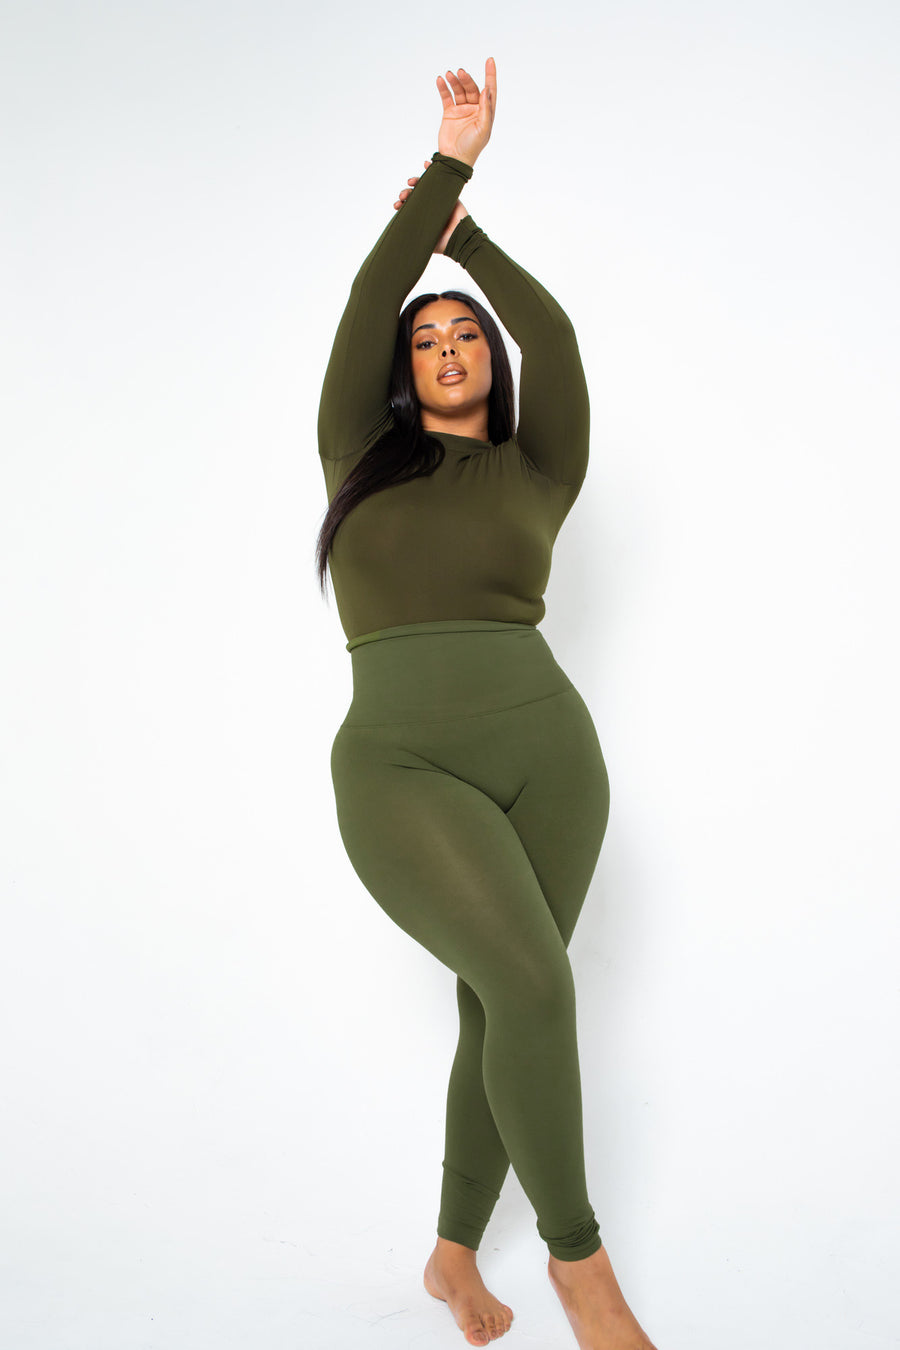 The Olive Yoga Tummy Control Legging fits up to PLUS